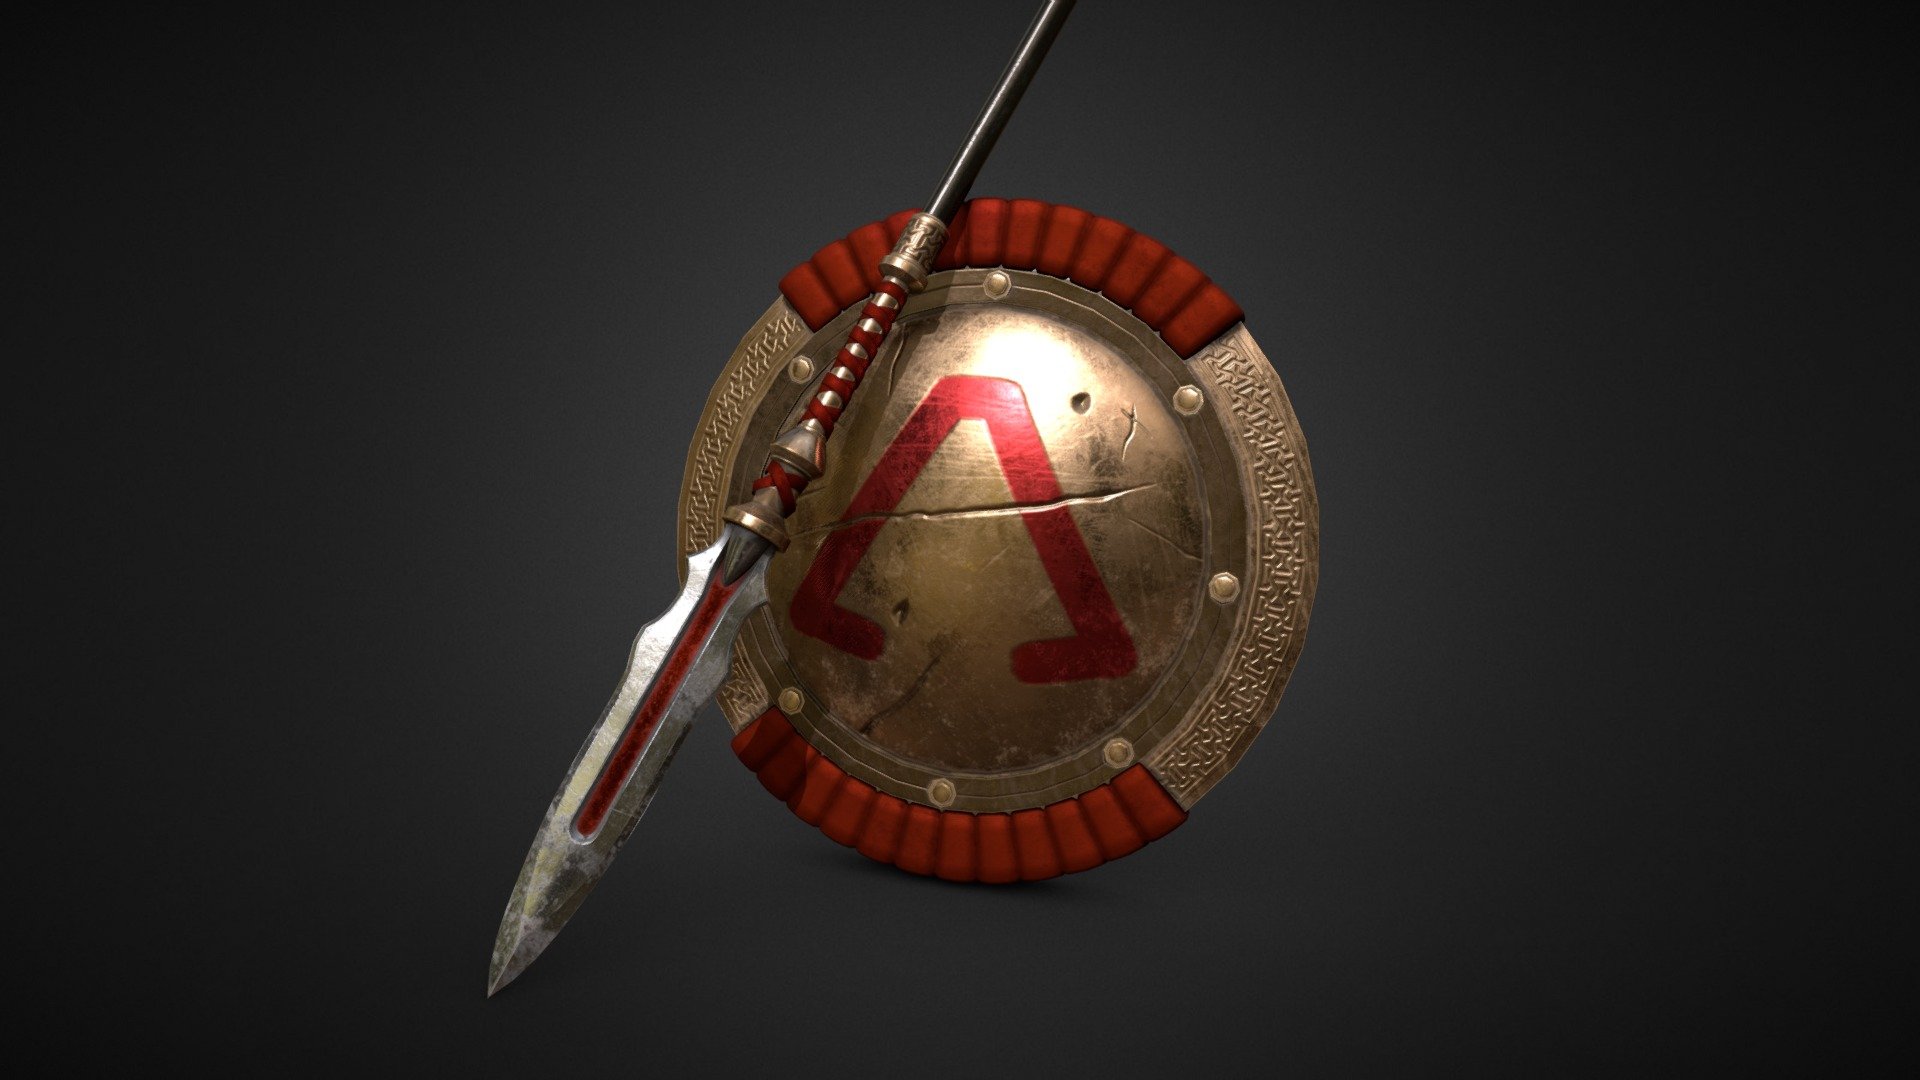 Arms of Sparta - one of Kratos weapons in God of War: Ghost of Sparta. Models were made in Blender and textured in Substance Painter.

Artstation: artstation.com/enviart

Twitter: twitter.com/EnviosityArt - Spartan Spear and Shield - 3D model by EnviArt 3d model